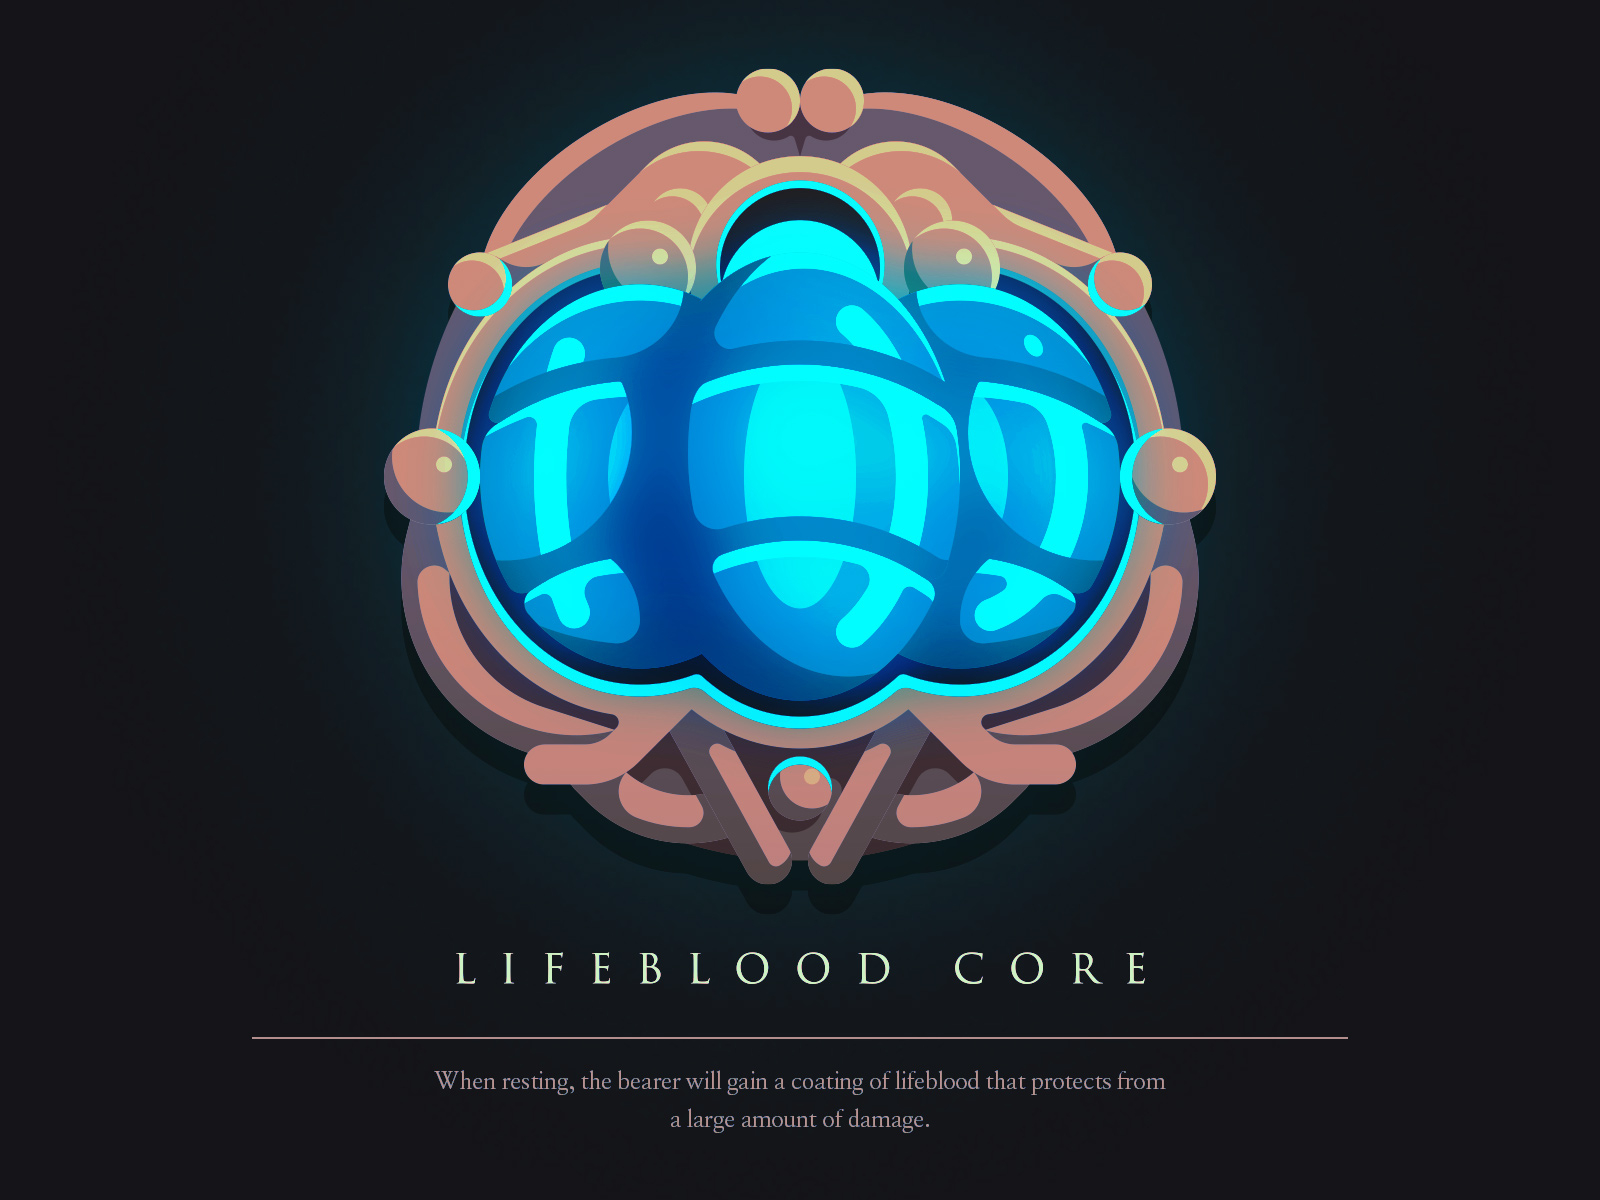 I Saw It On Twitch: Lifeblood Core charm hollow knight illustration illustrator lifeblood core twitch video game